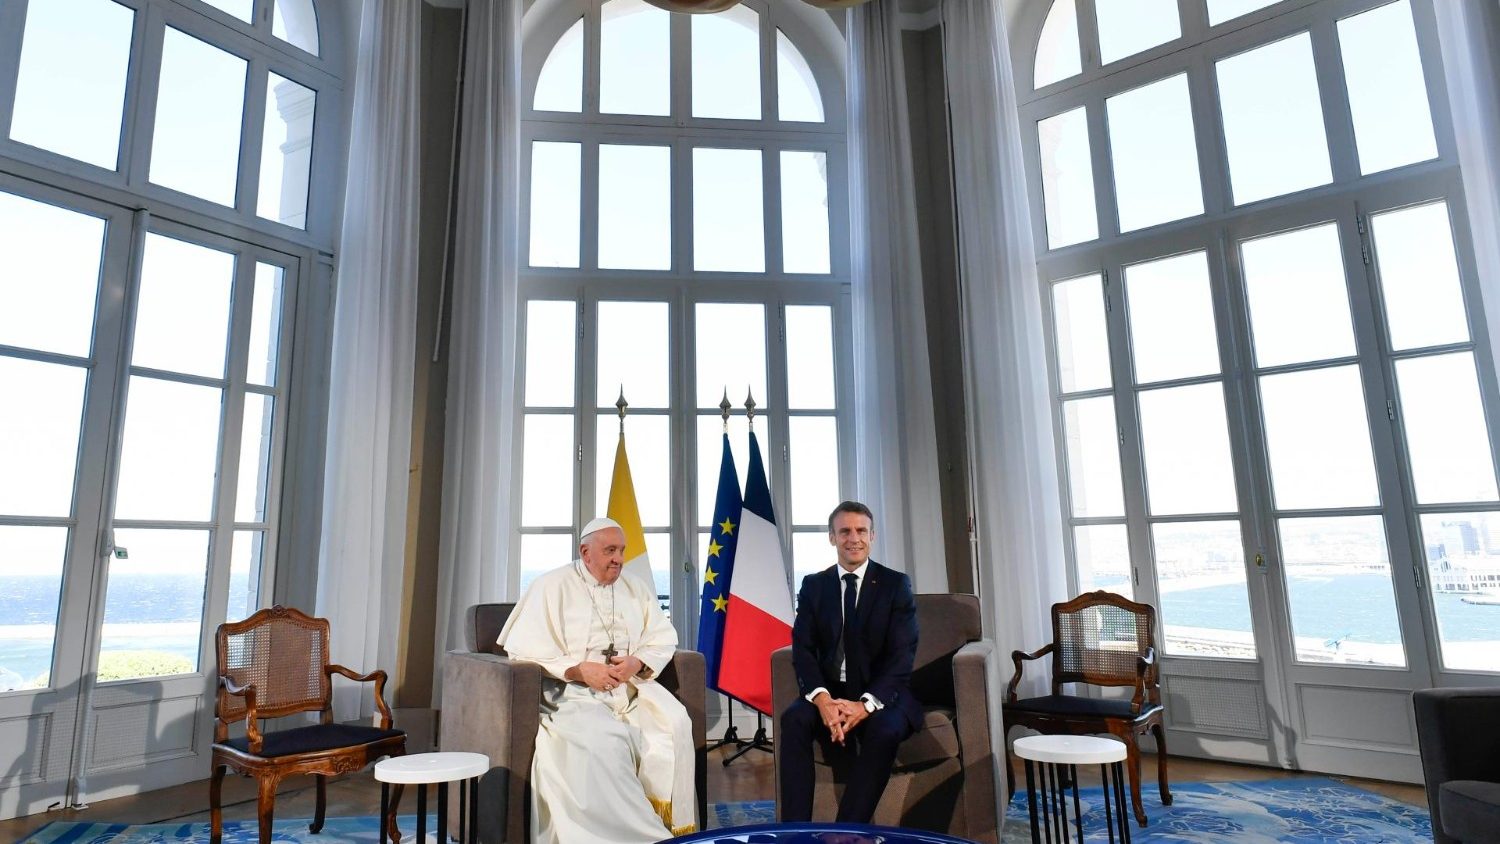 The Pope’s Private Meeting with French President and Family at Mediterranean Regional Conference Closing Ceremony